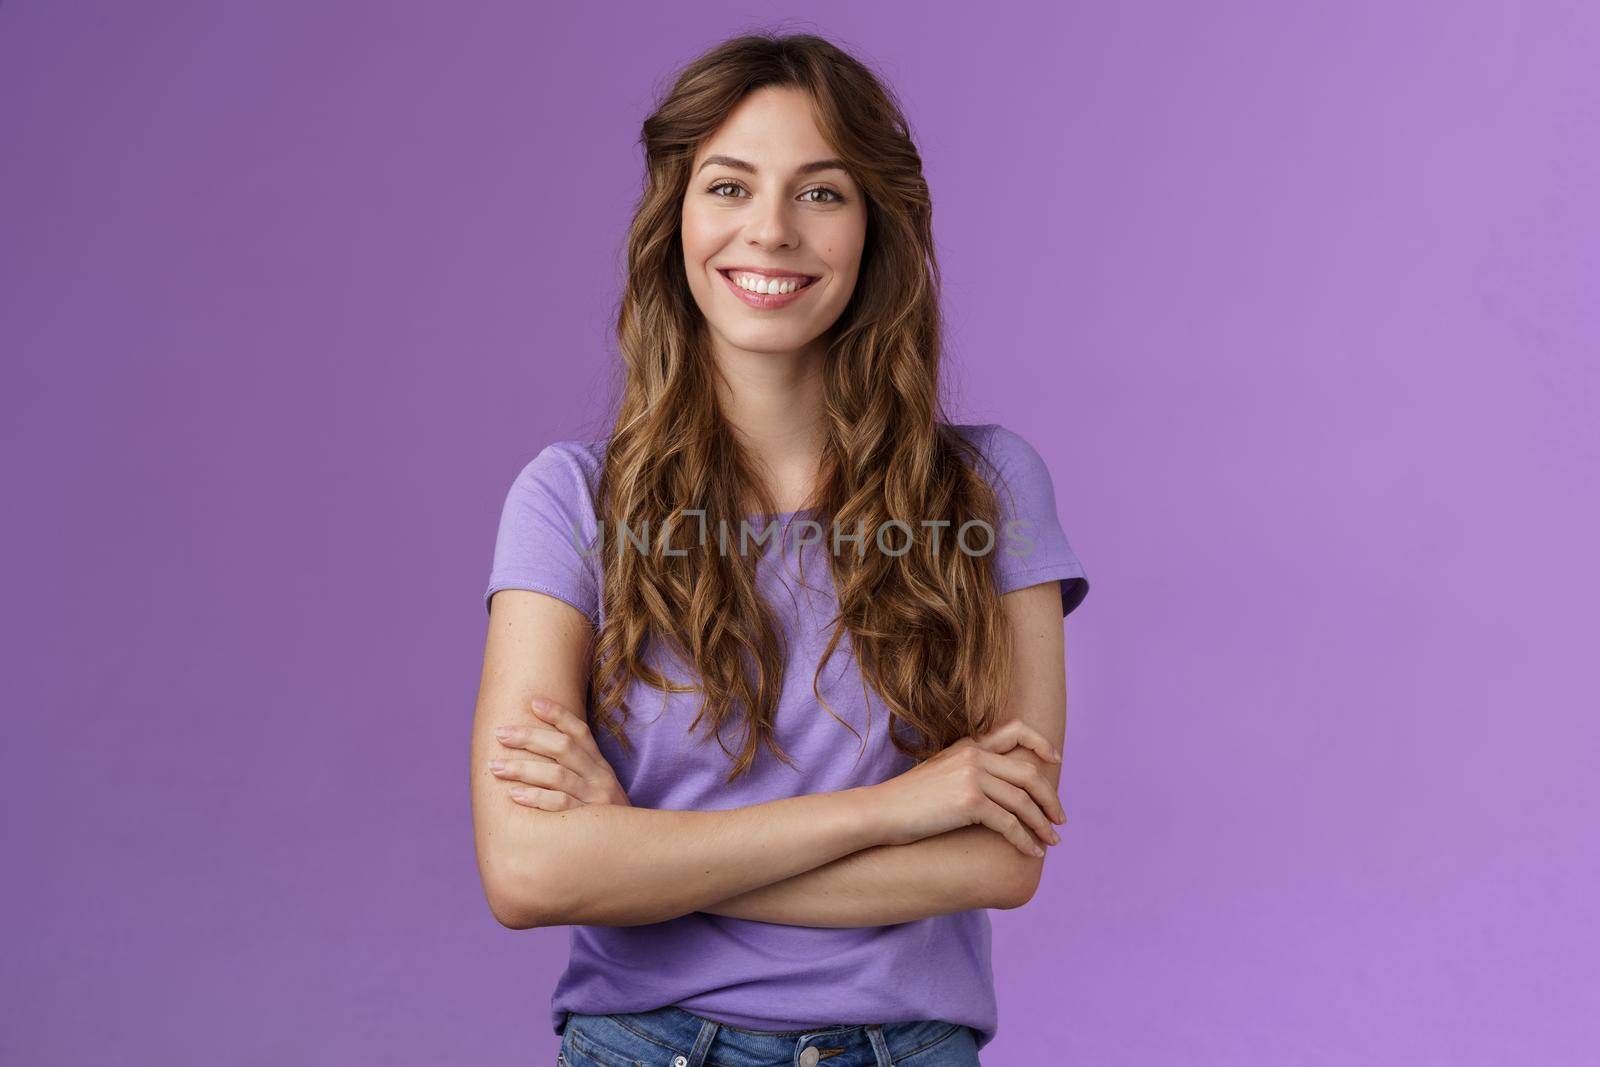 Confident professional skillful female photographer freelancer ready photo competition cross hands chest motivated assertive pose smiling broadly confident own abilities stand purple background.